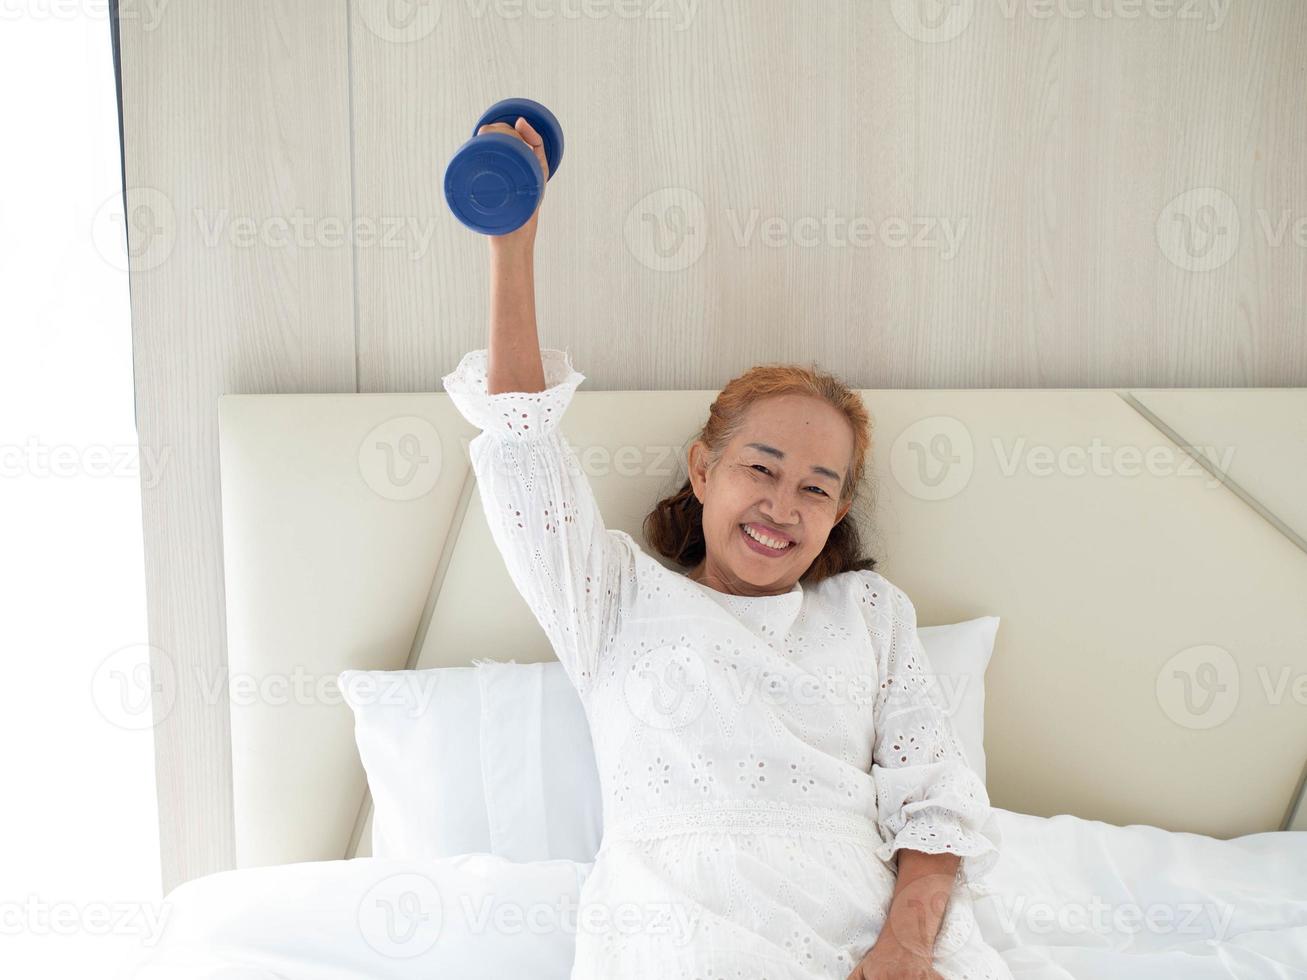 Female senior older woman lady her person portrait look at camera holding dumbbell happy smile indoor bedroom home house strong healthy happy lifestyle activity exercise workout vitality wellness photo